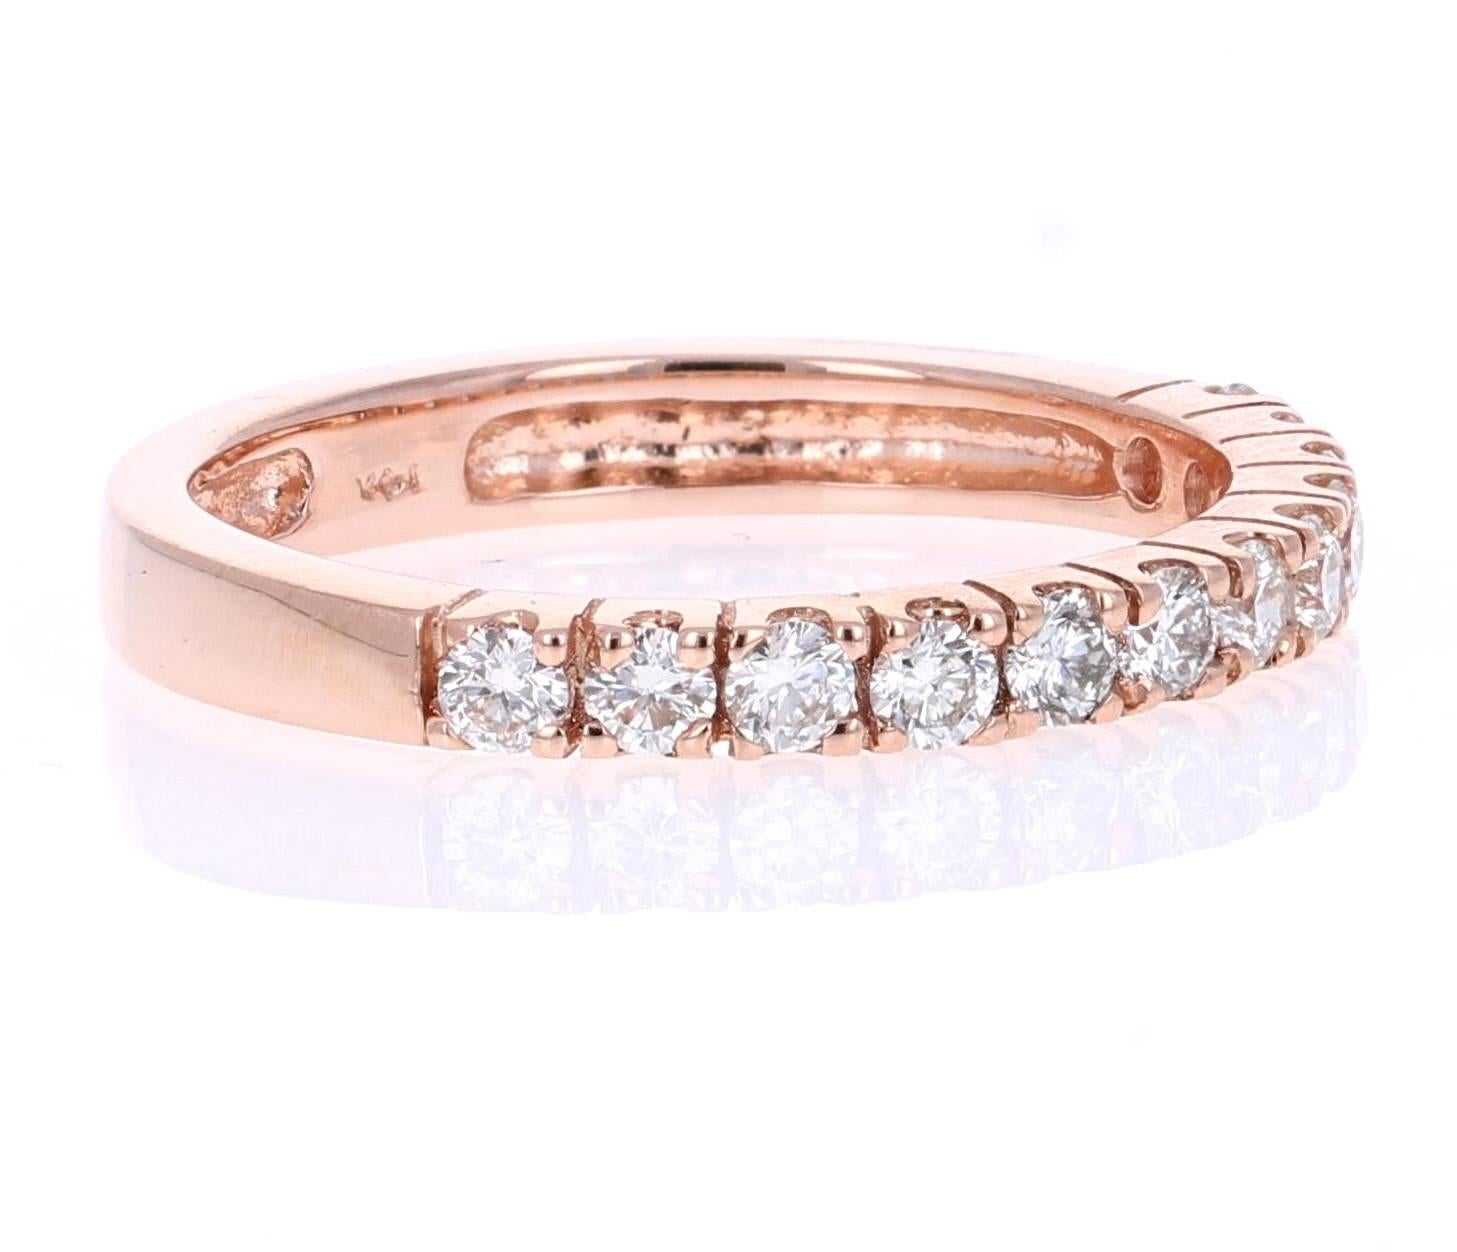 0.48 Carat Round Cut Diamond Rose Gold Band!

Cute and dainty 0.48 Carat Diamond band that is sure to be a great addition to anyone's accessory collection!   There are 12 Round Cut Diamonds that weigh 0.48 carats.  The total carat weight of the band